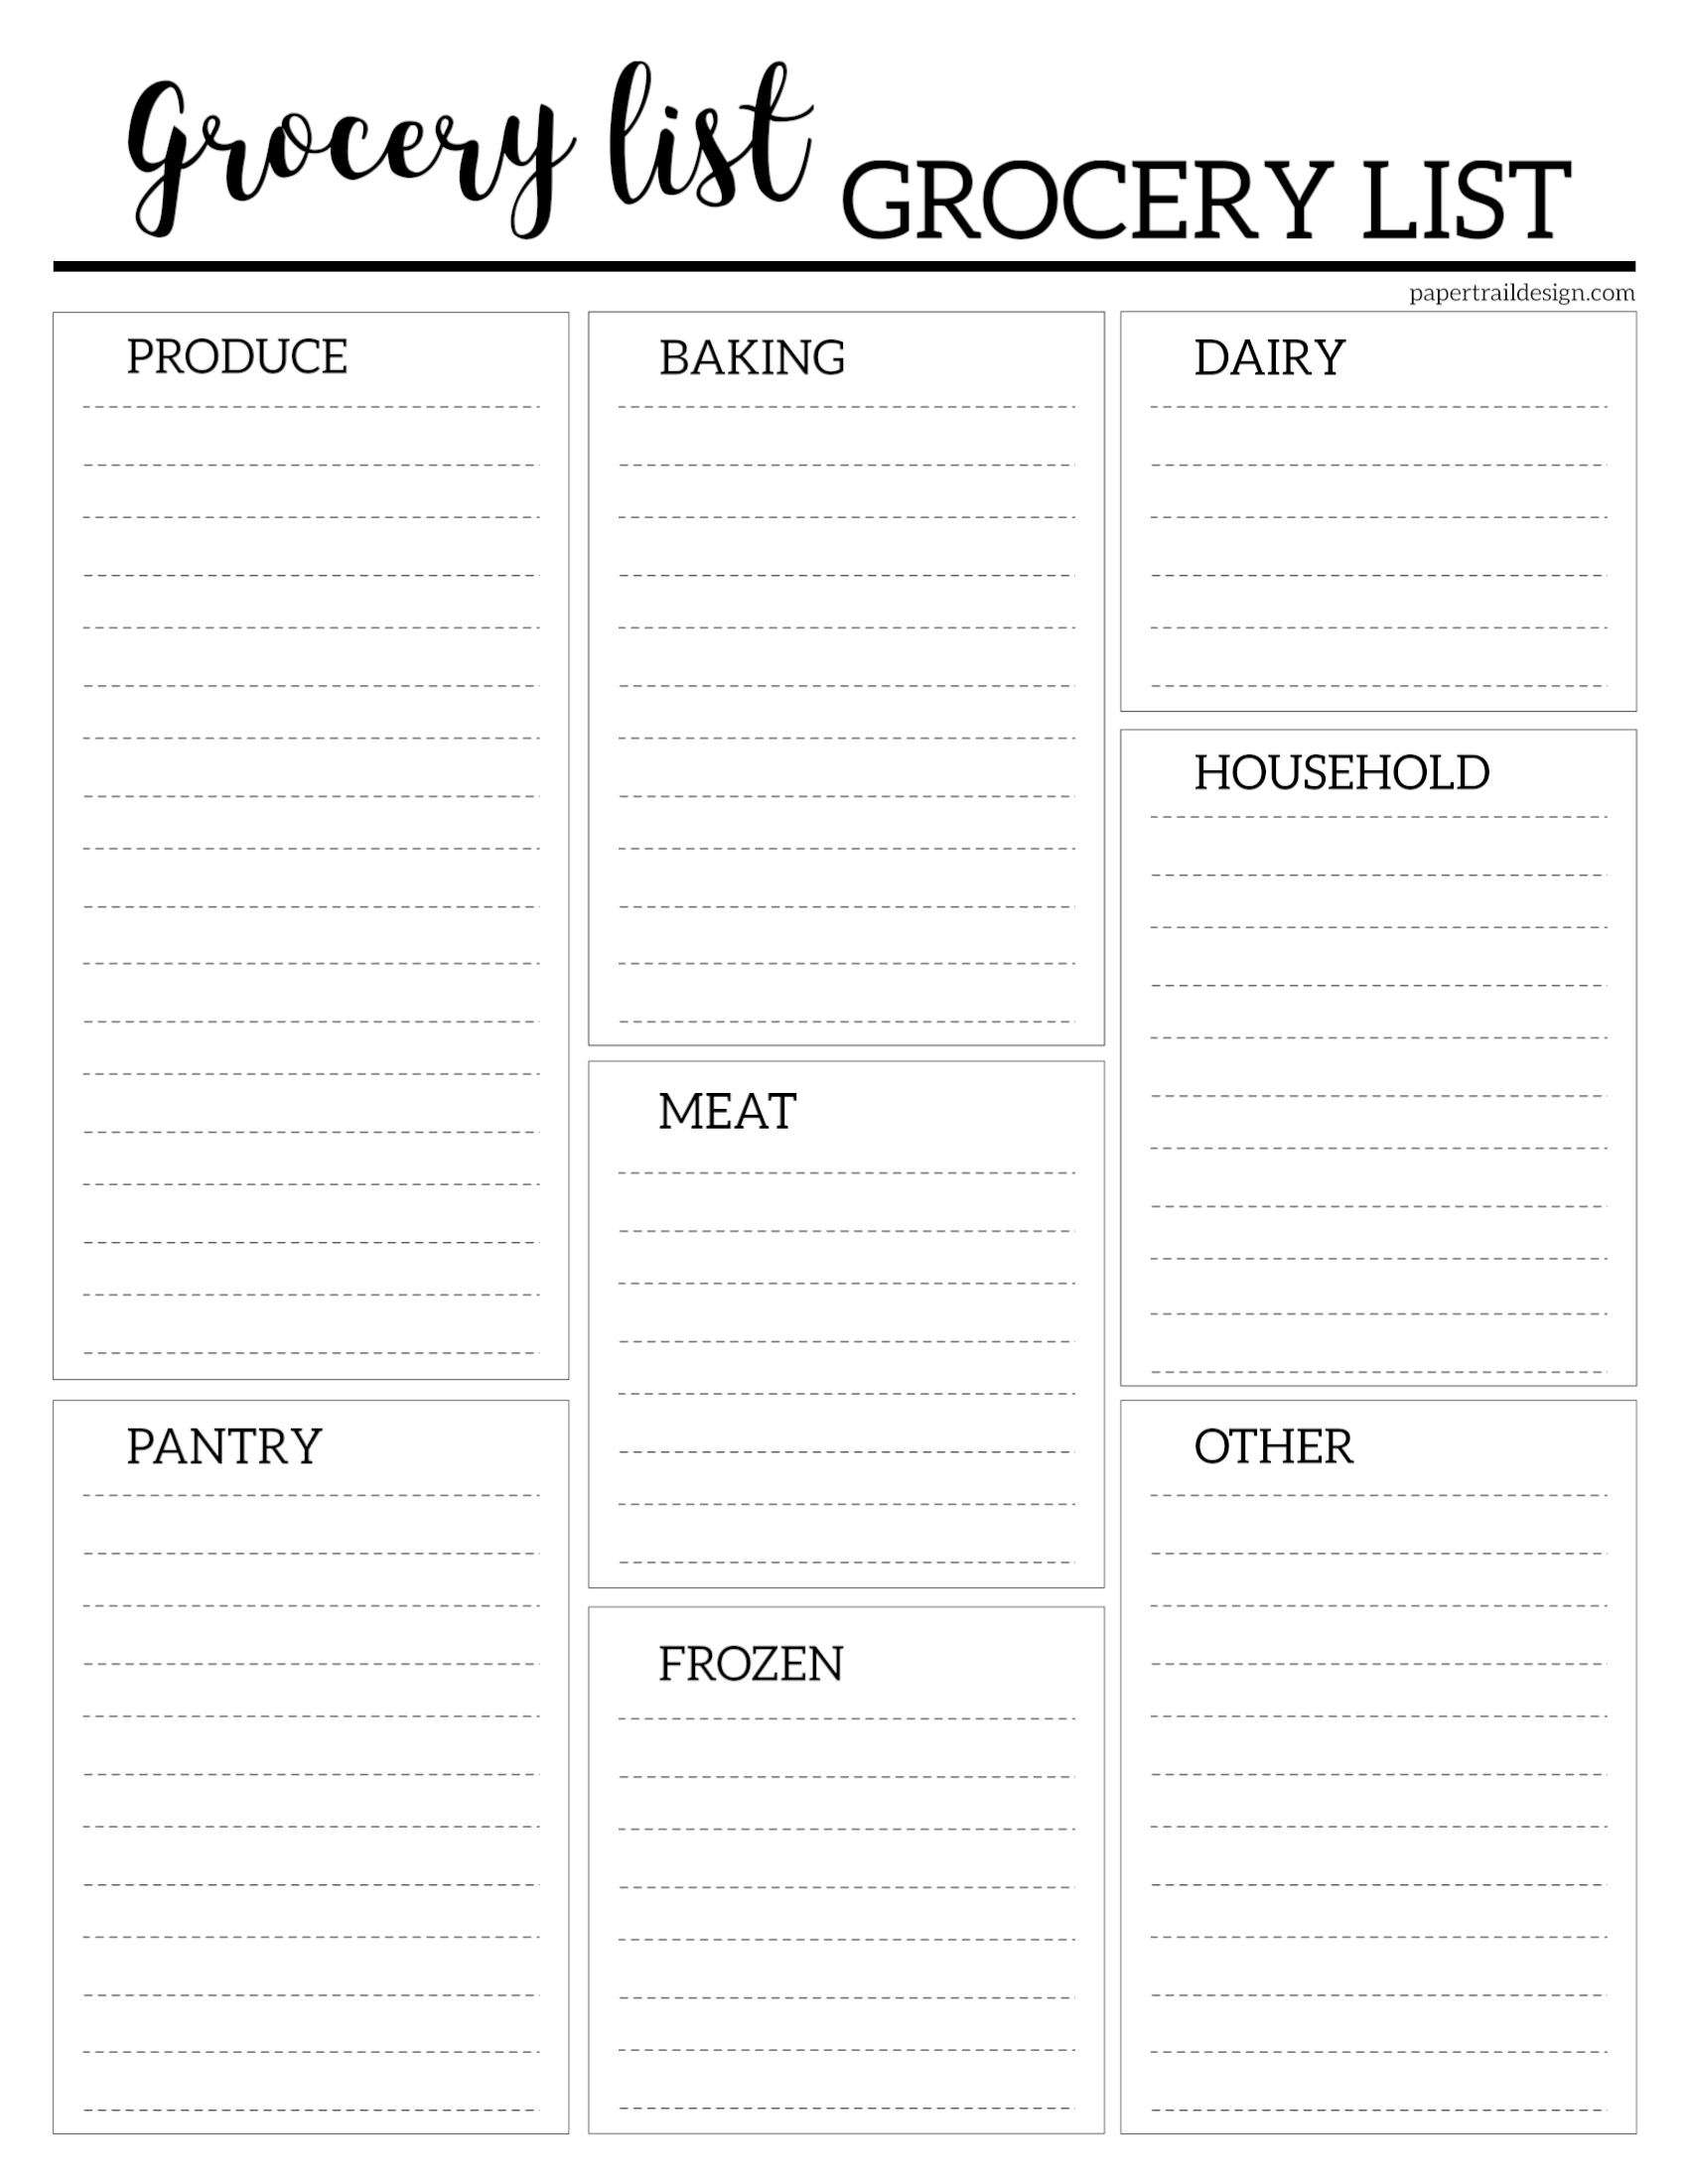 6-free-shopping-list-templates-excel-pdf-formats-2-weeks-of-meal-plans-plus-free-grocery-list